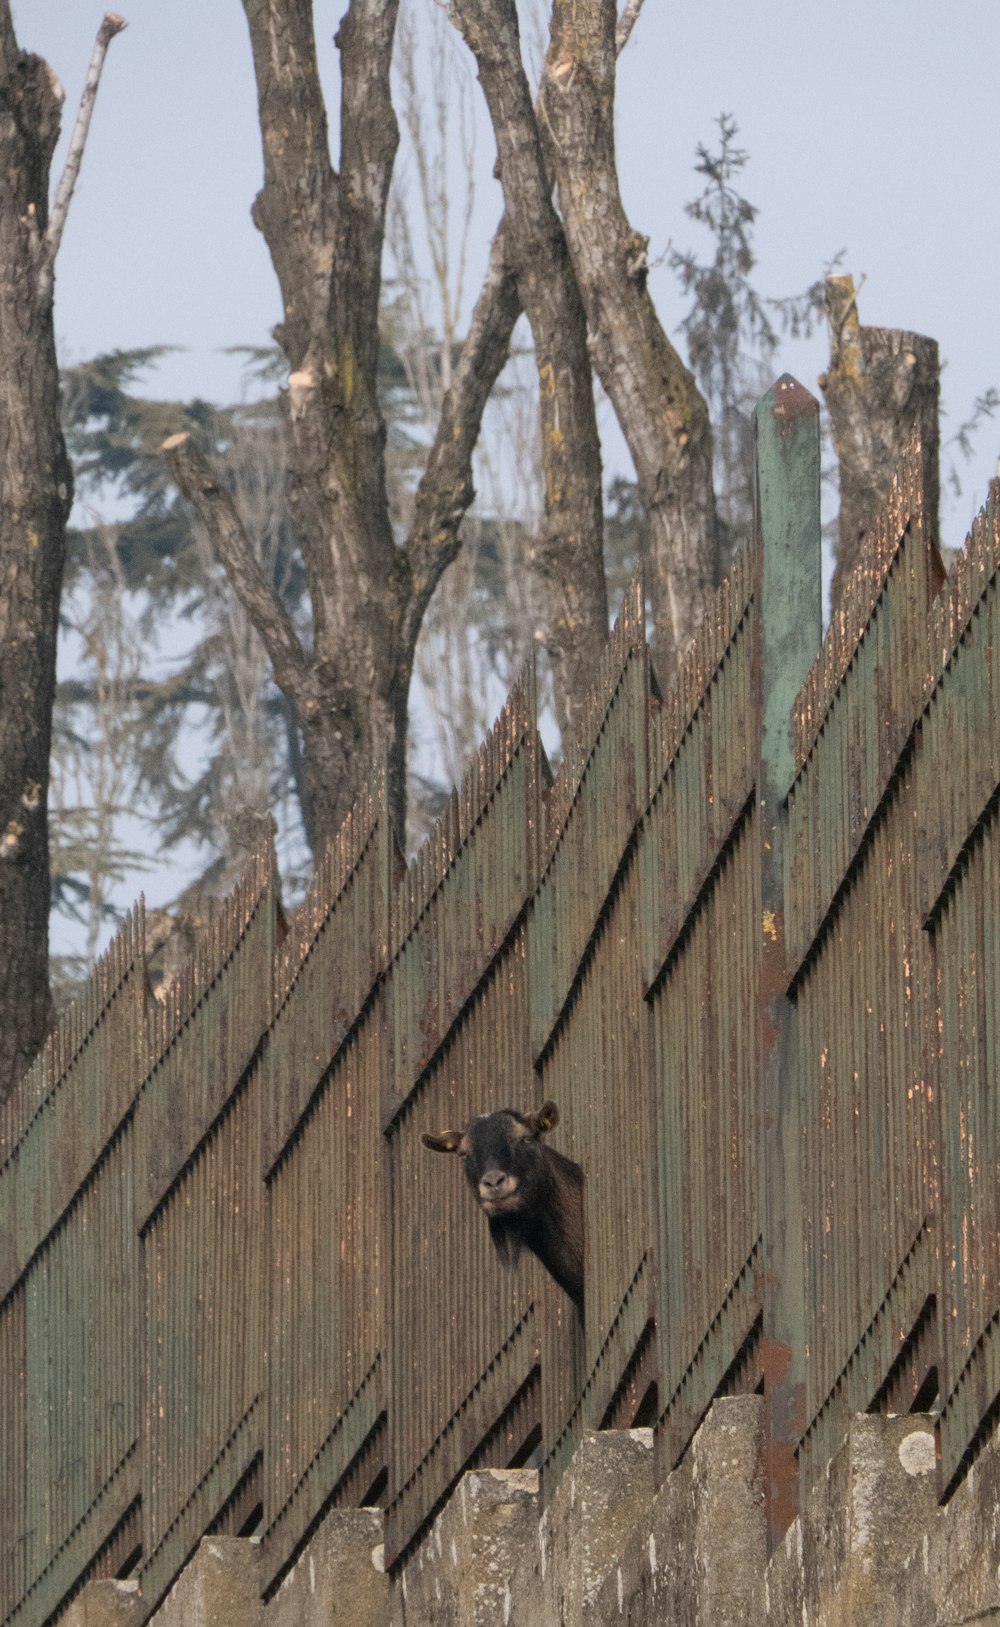 a bird is perched on a wooden fence